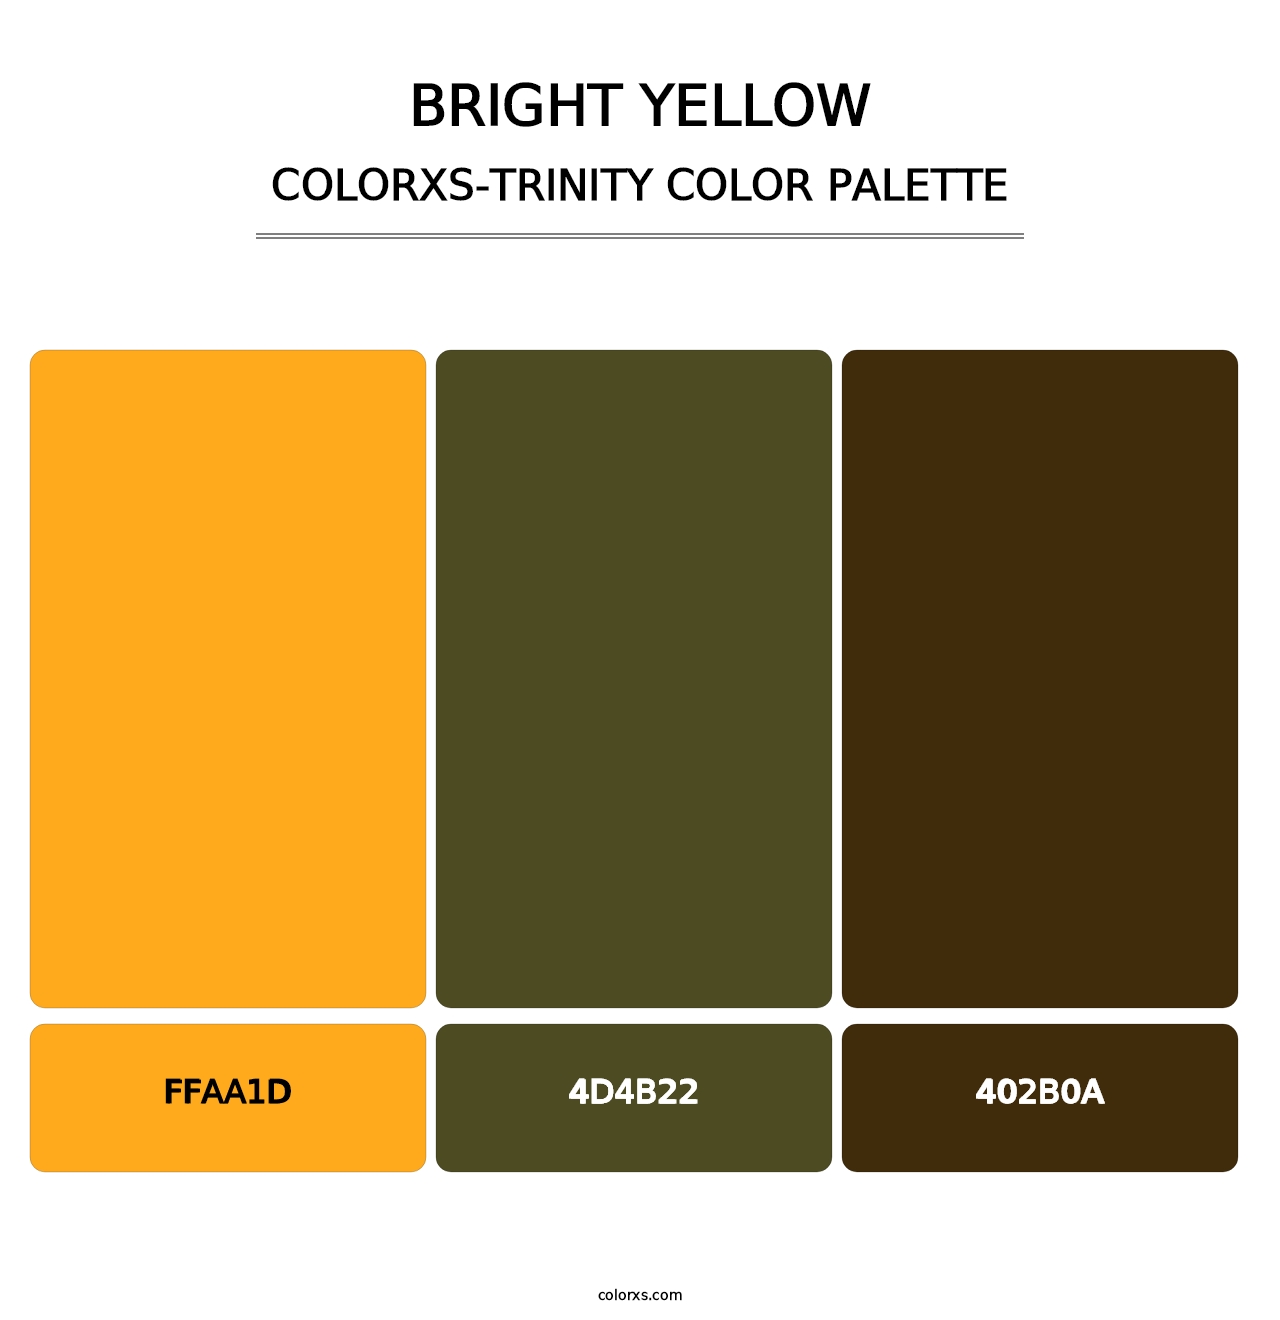 Bright Yellow - Colorxs Trinity Palette